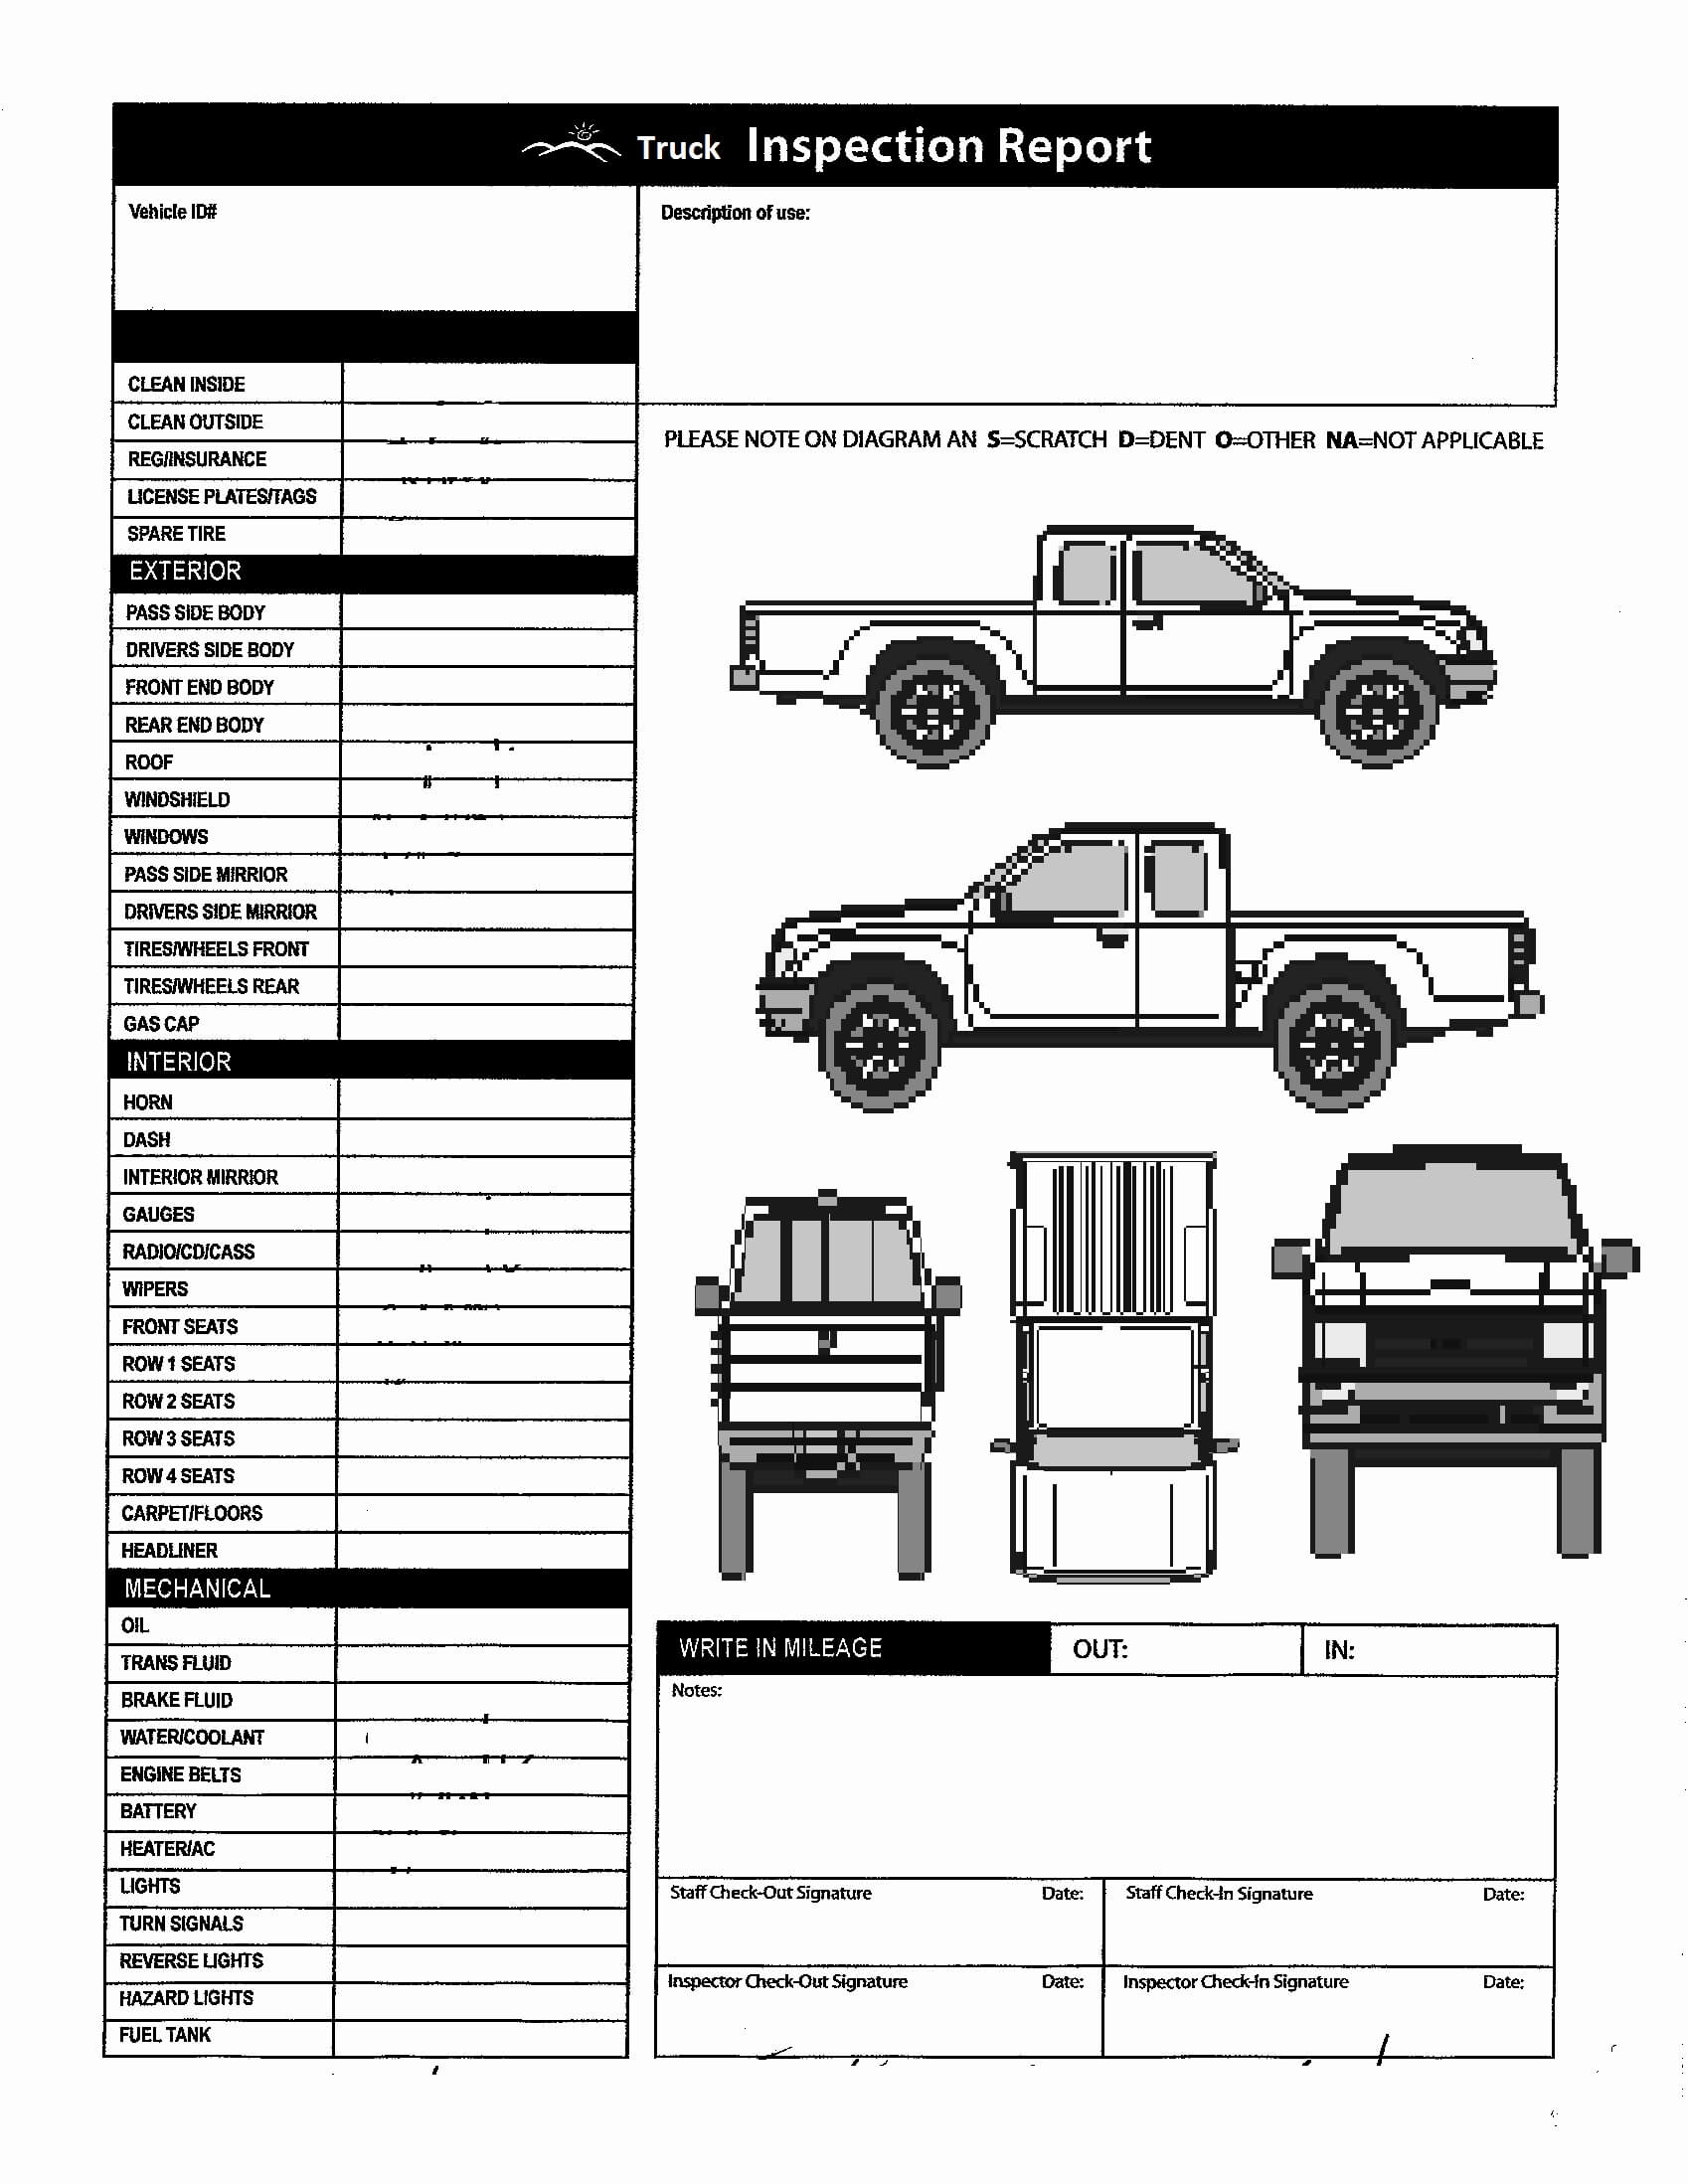 Download Vehicle Inspection Report Template | Cialis In Vehicle Inspection Report Template